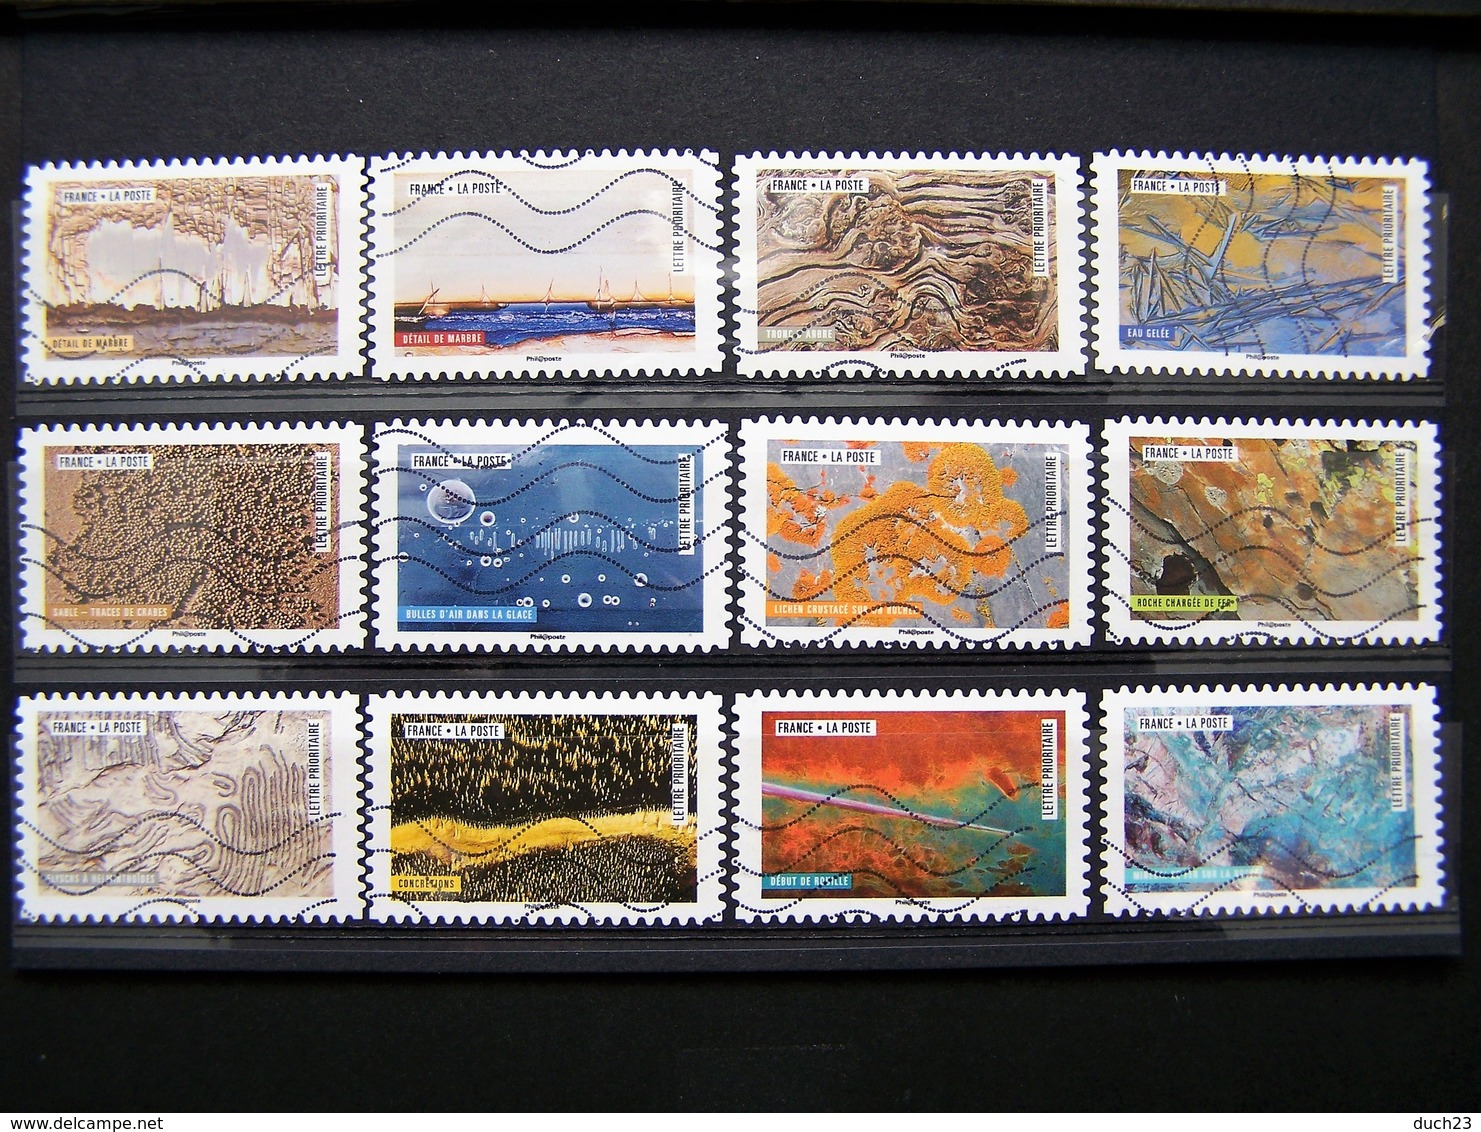 OBLITERE ANNEE 2018 N°1502/1513 SERIE COMPLETE 12 VALEURS CARNET LA NATURE A L'OEUVRE AUTOCOLLANT ADHESIF - Used Stamps